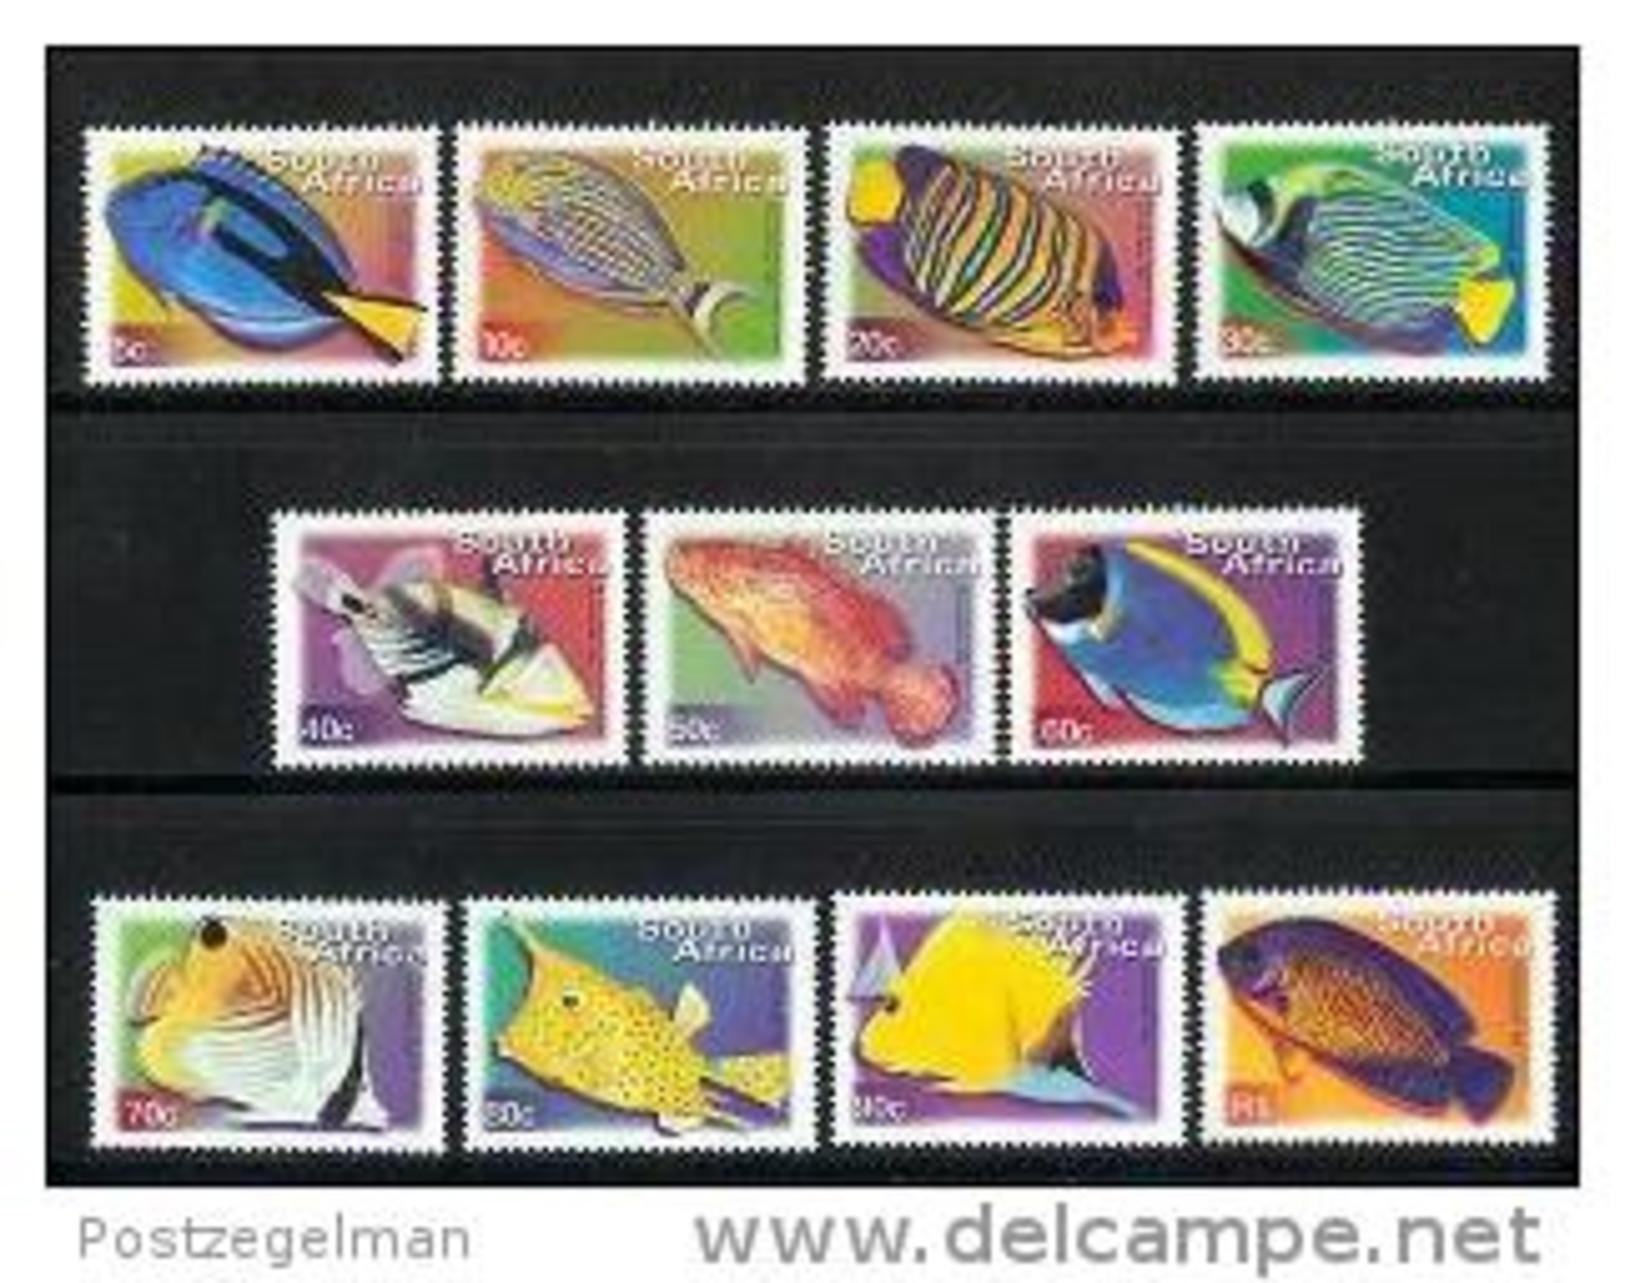 SOUTH AFRICA, 2001, Mint Never Hinged Stamp(s), Definitives Fishes (11 Stamps), Nr(s) 1285-1295 #6756-8 - Nuovi